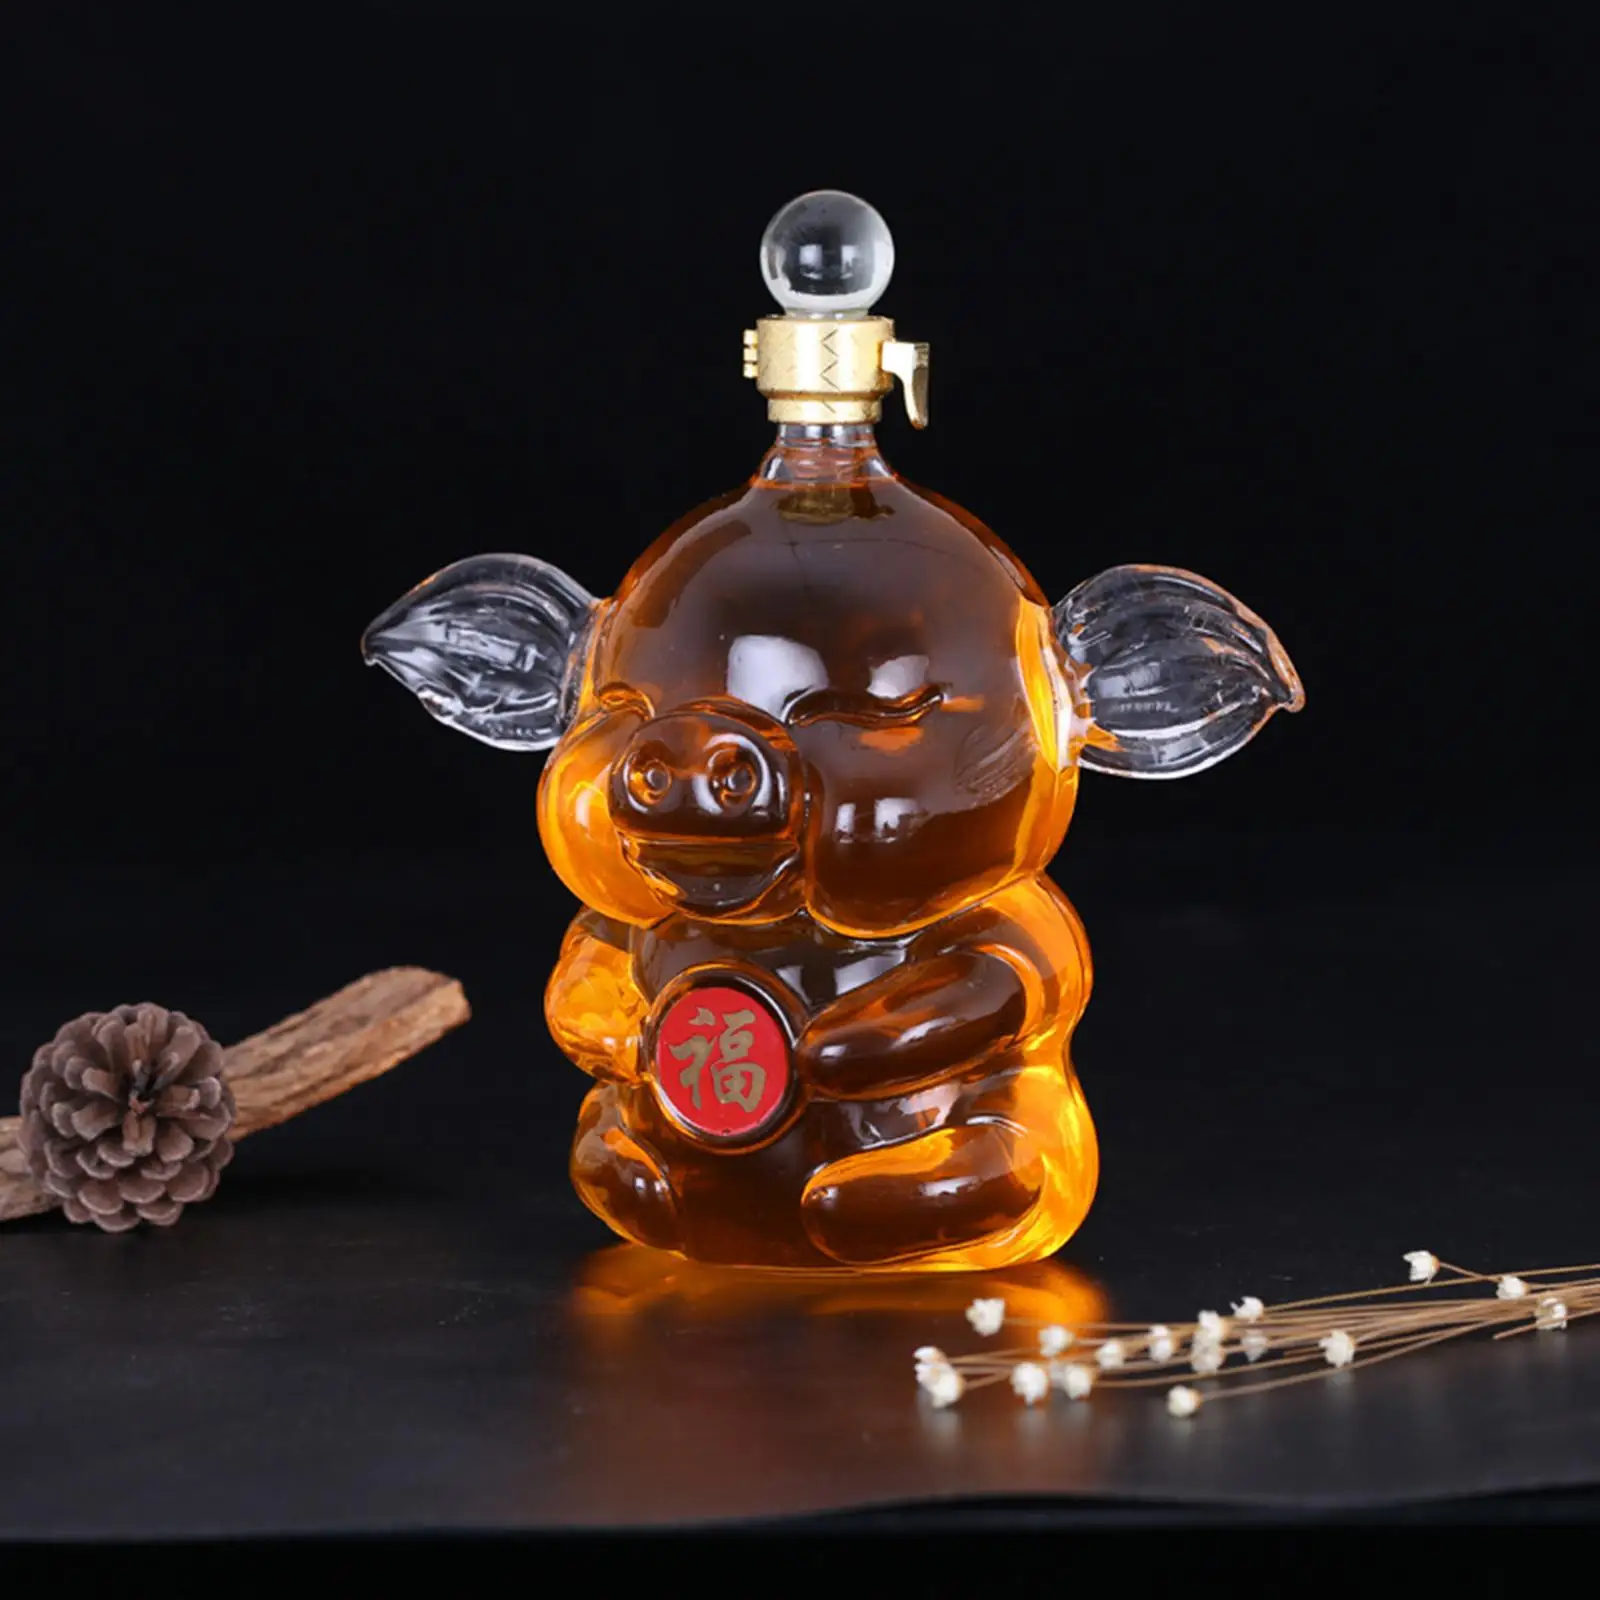 1 Piece Decanter Glass 1L Liquor Leads Entertaining Novelty Rum Barware Cute Pig Shaped for Home Dining Father